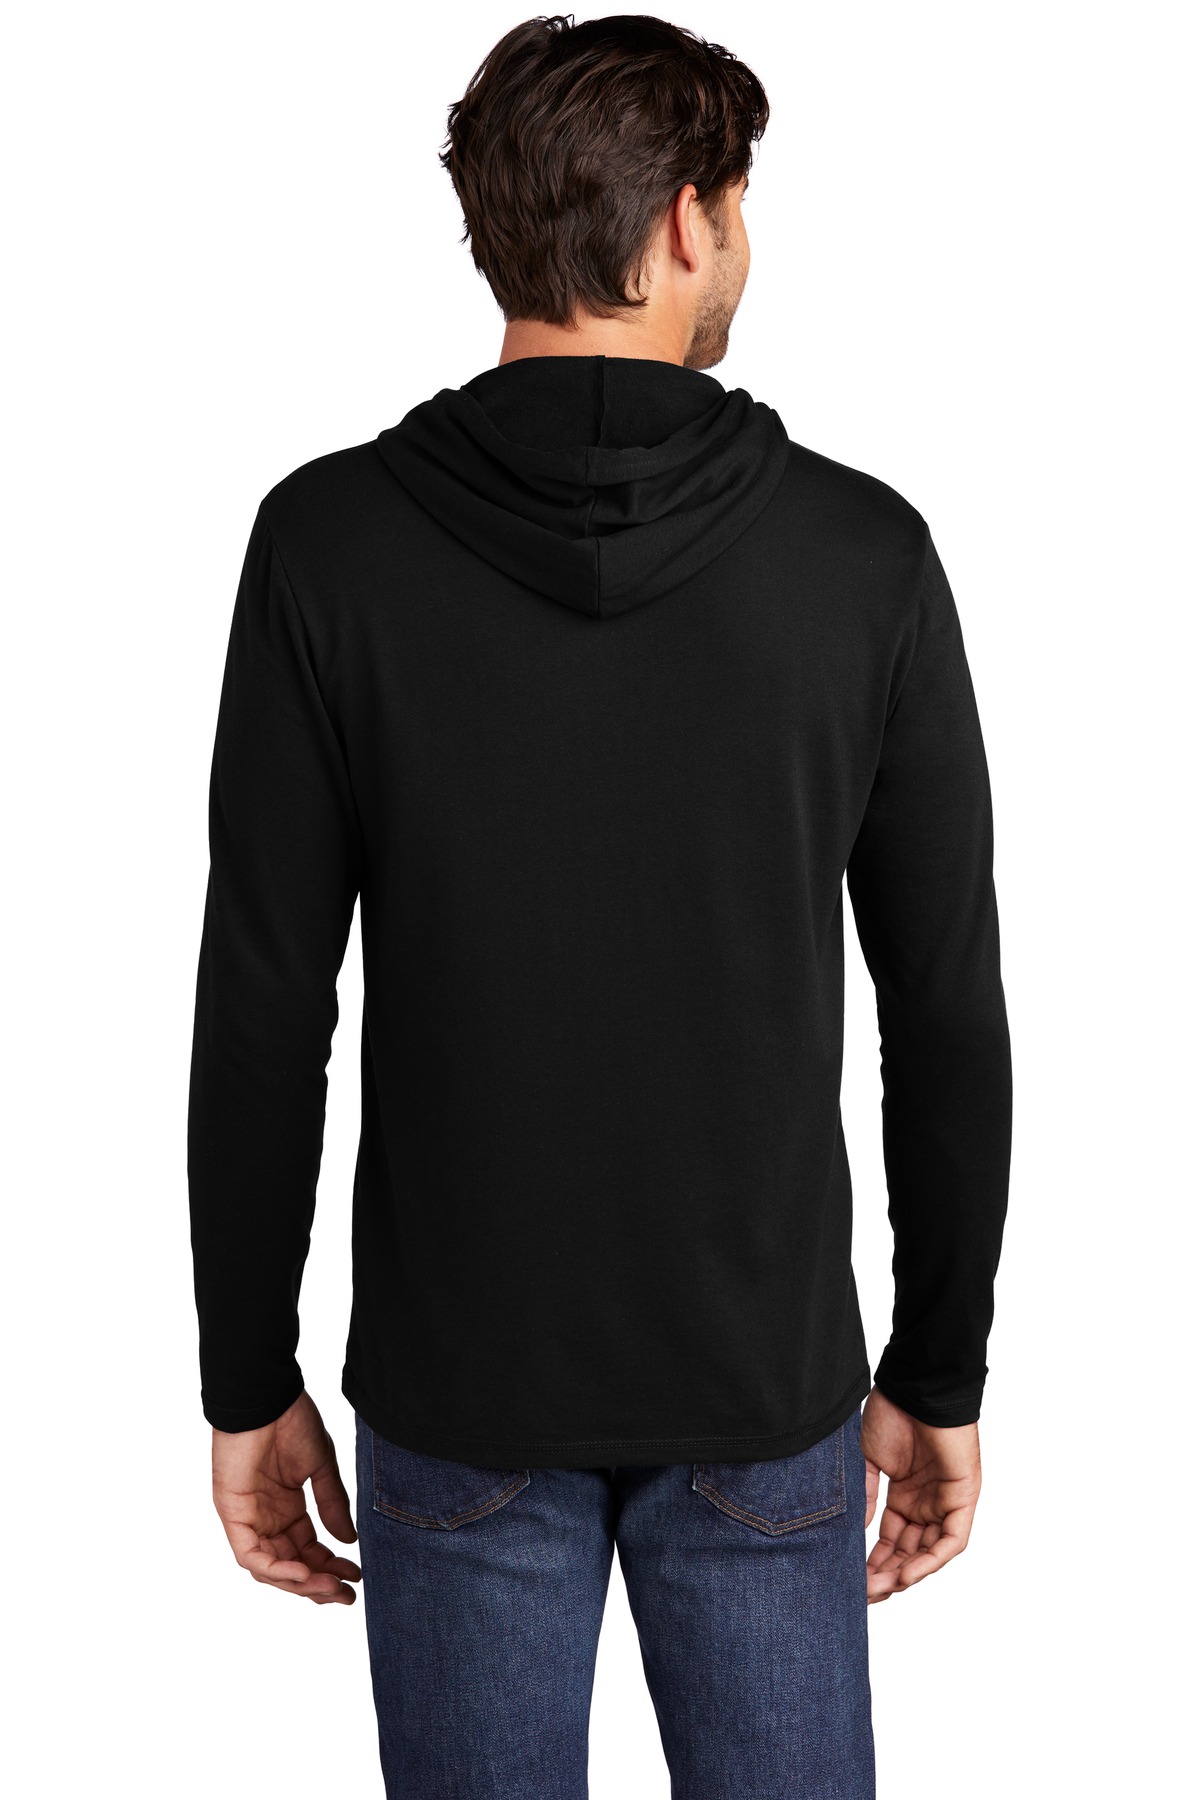 District ® Featherweight French Terry ™ Hoodie DT571 - Custom Shirt Shop